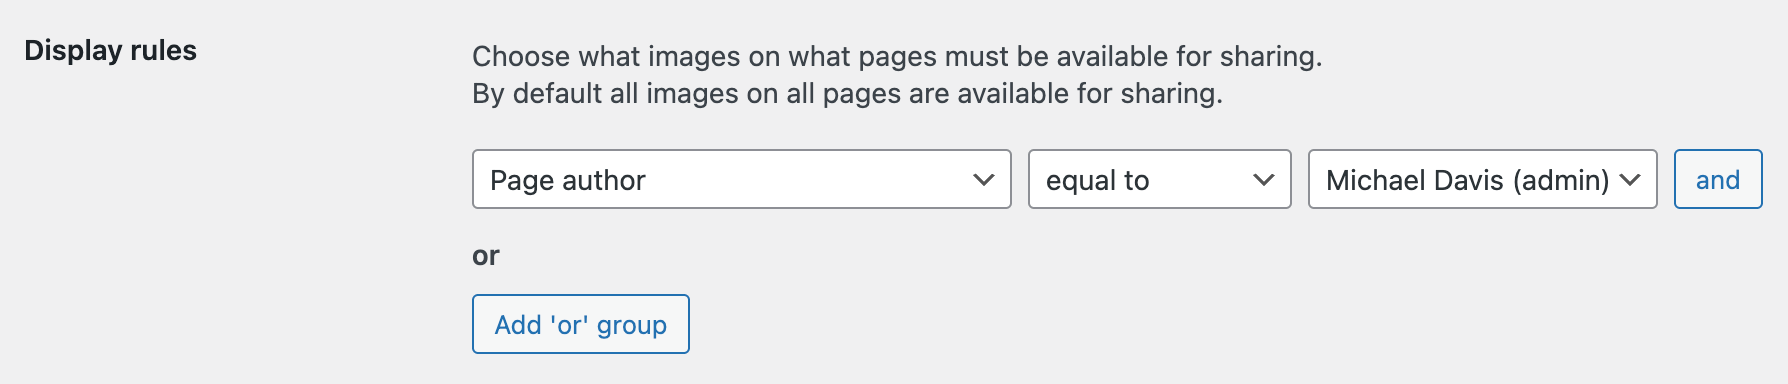 New Page Author display rule